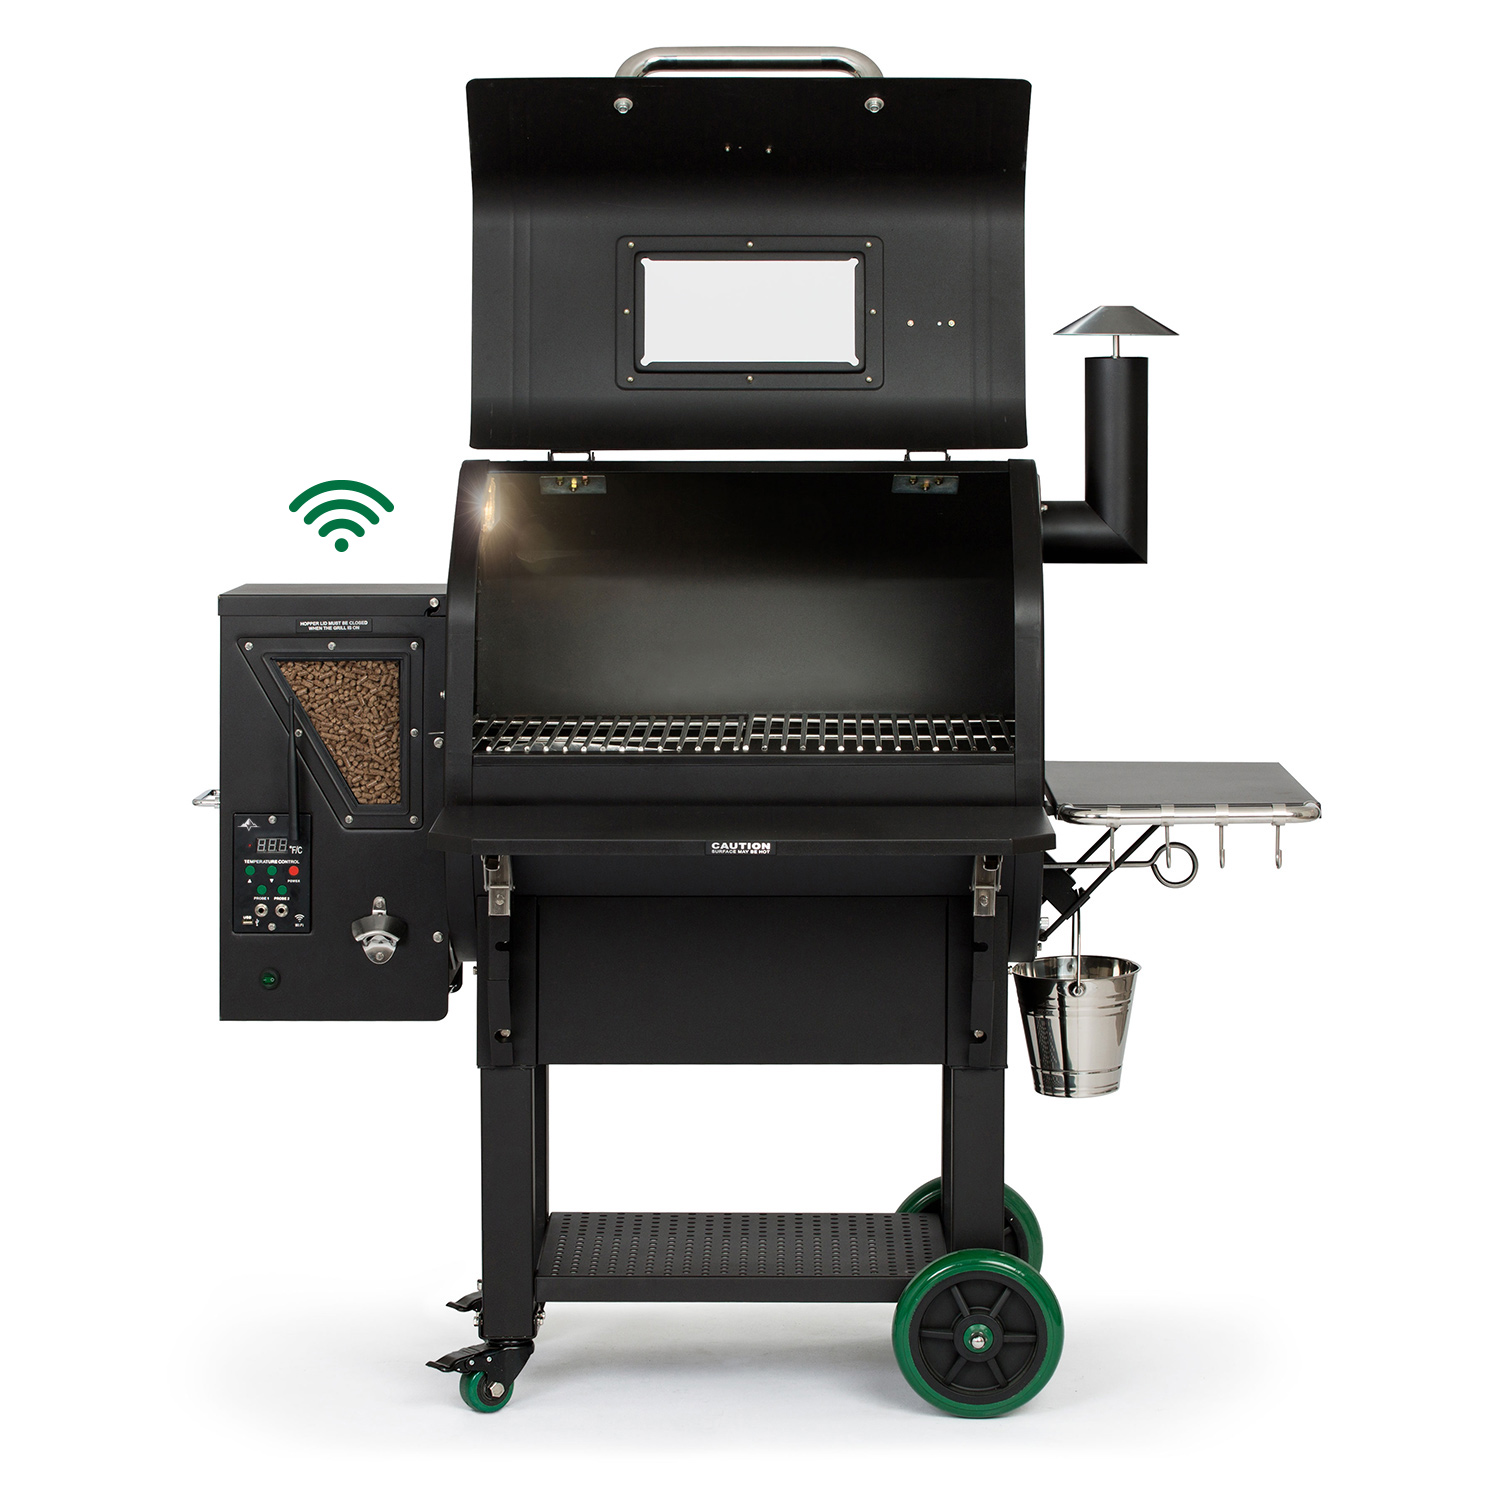 GMG LEDGE WIFI PELLET GRILL
BLACK- ROTISSERIE ENABLED
(SOLD SEPERATE)